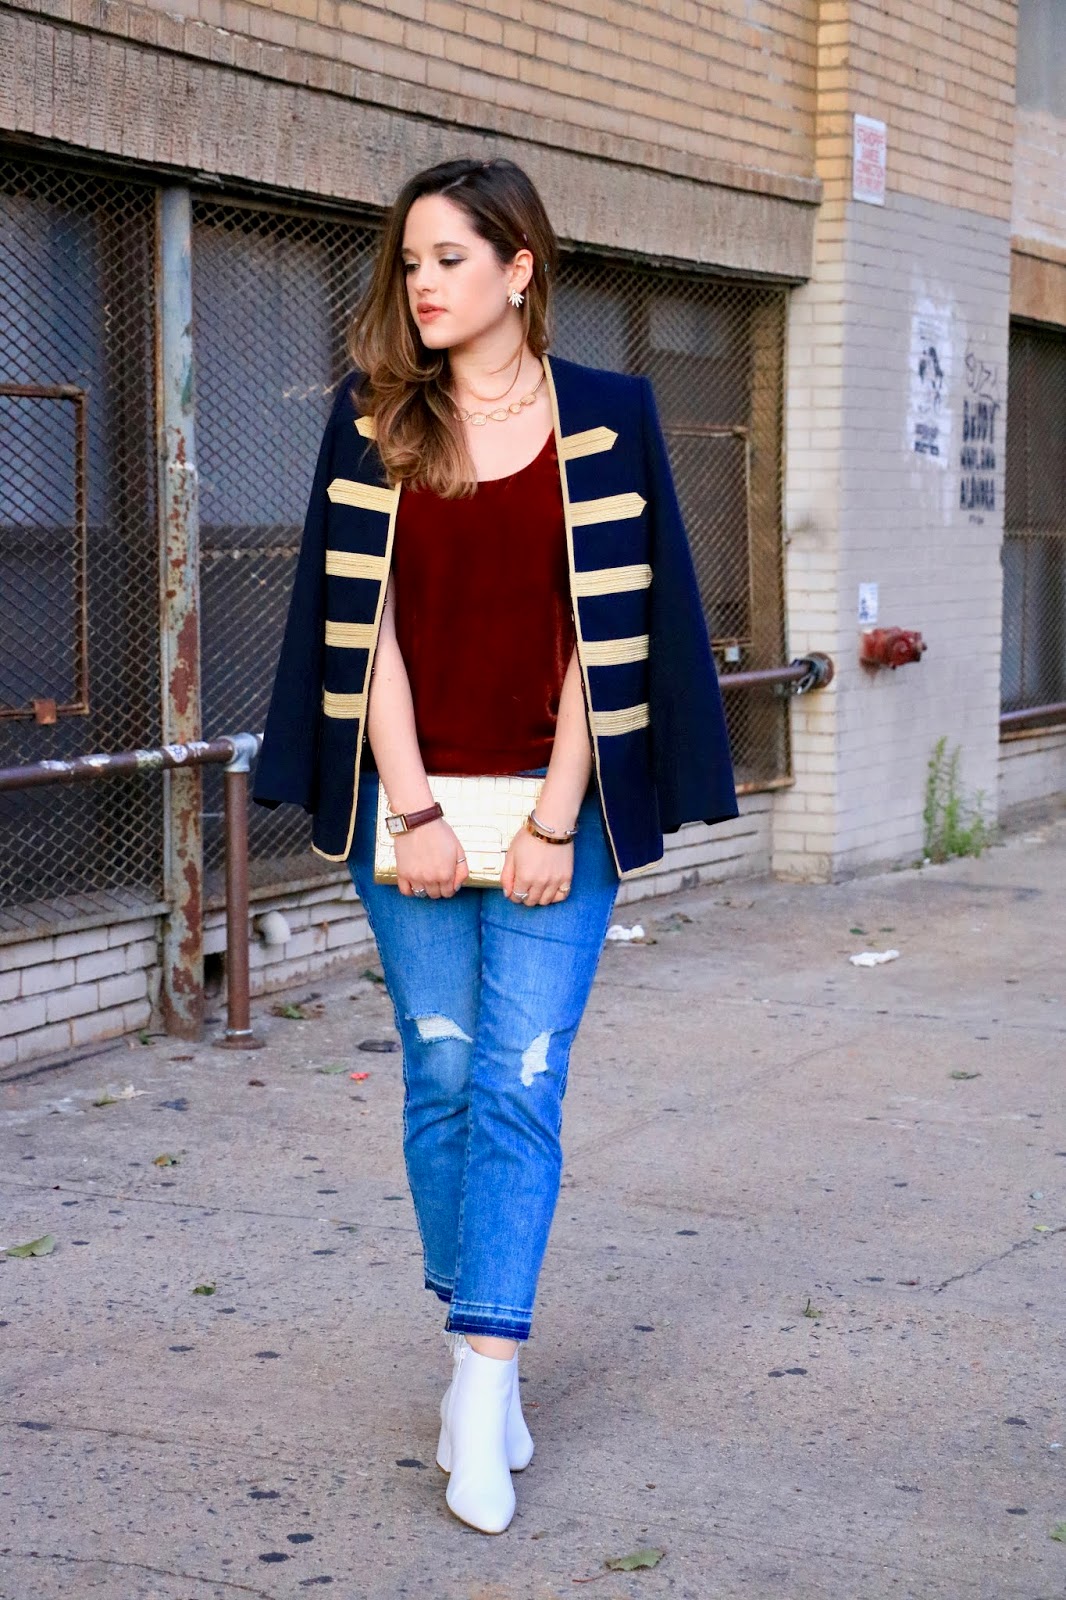 Nyc fashion blogger Kathleen Harper showing how to wear white boots